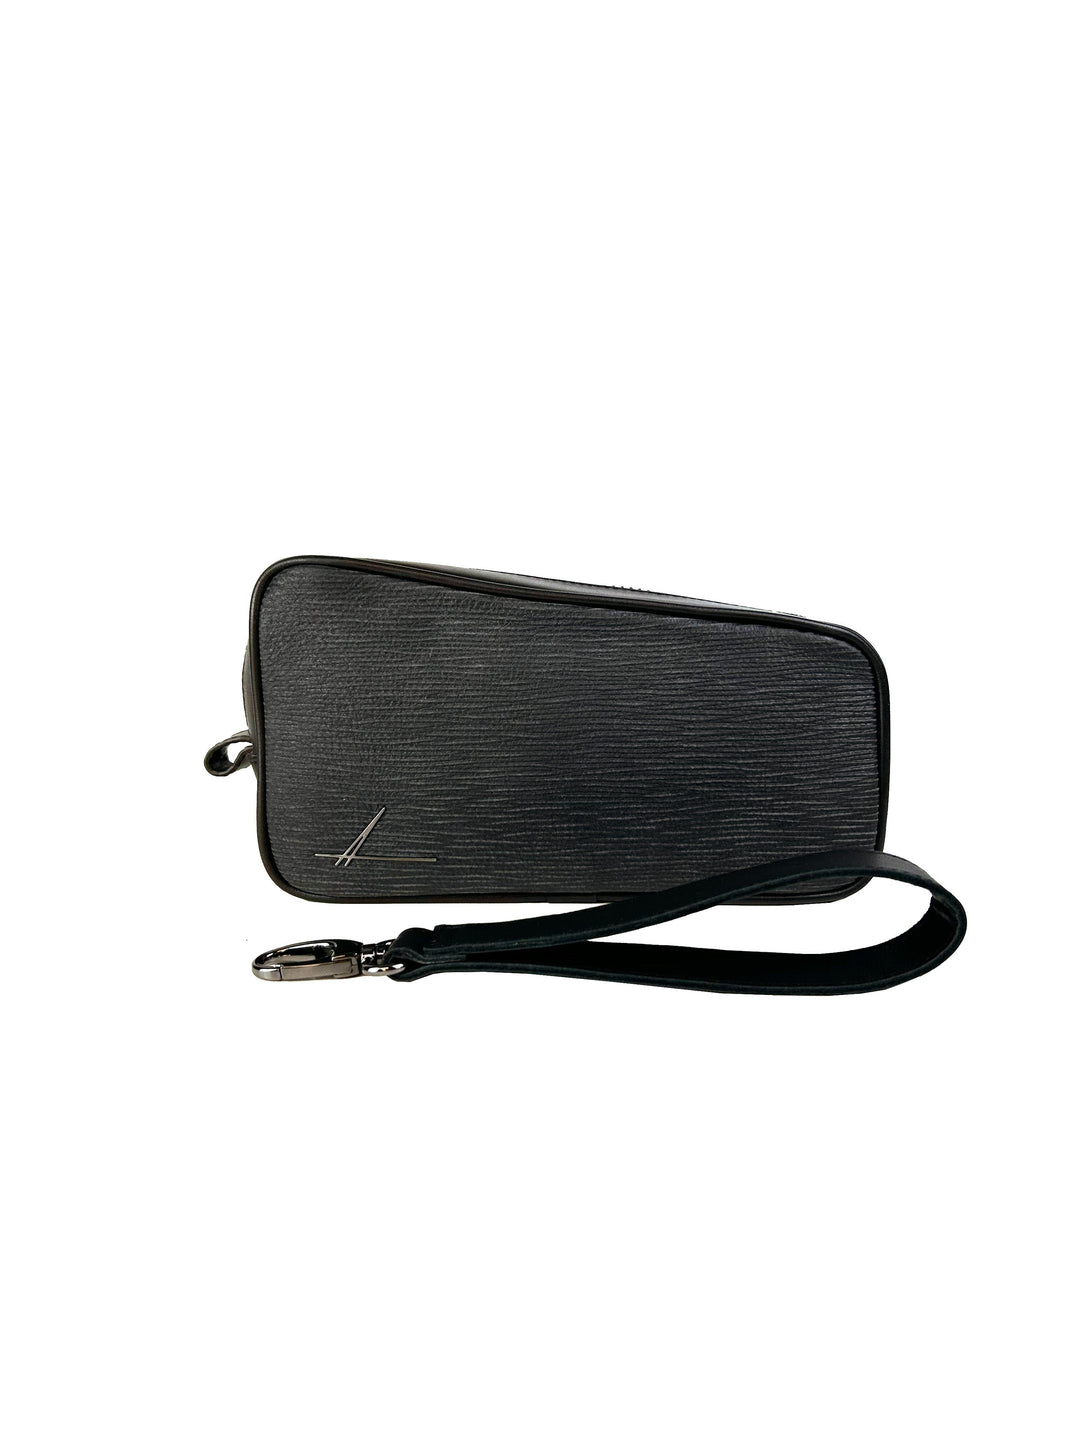 Black leather wristlet clutch with detachable strap and silver hardware